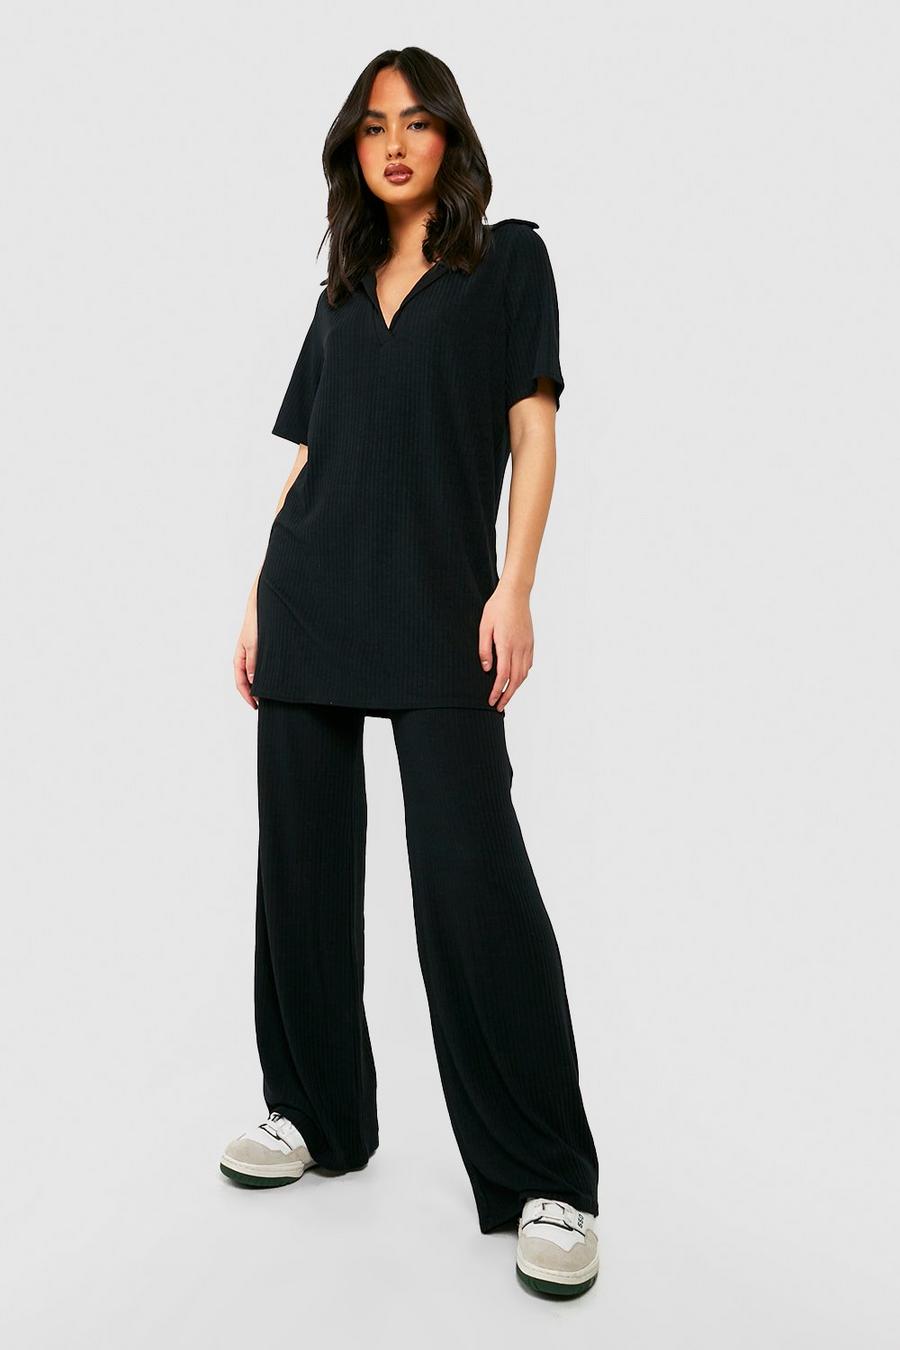 Black Soft Rib Knit Collared Tunic And Trouser Relaxed Co-ord